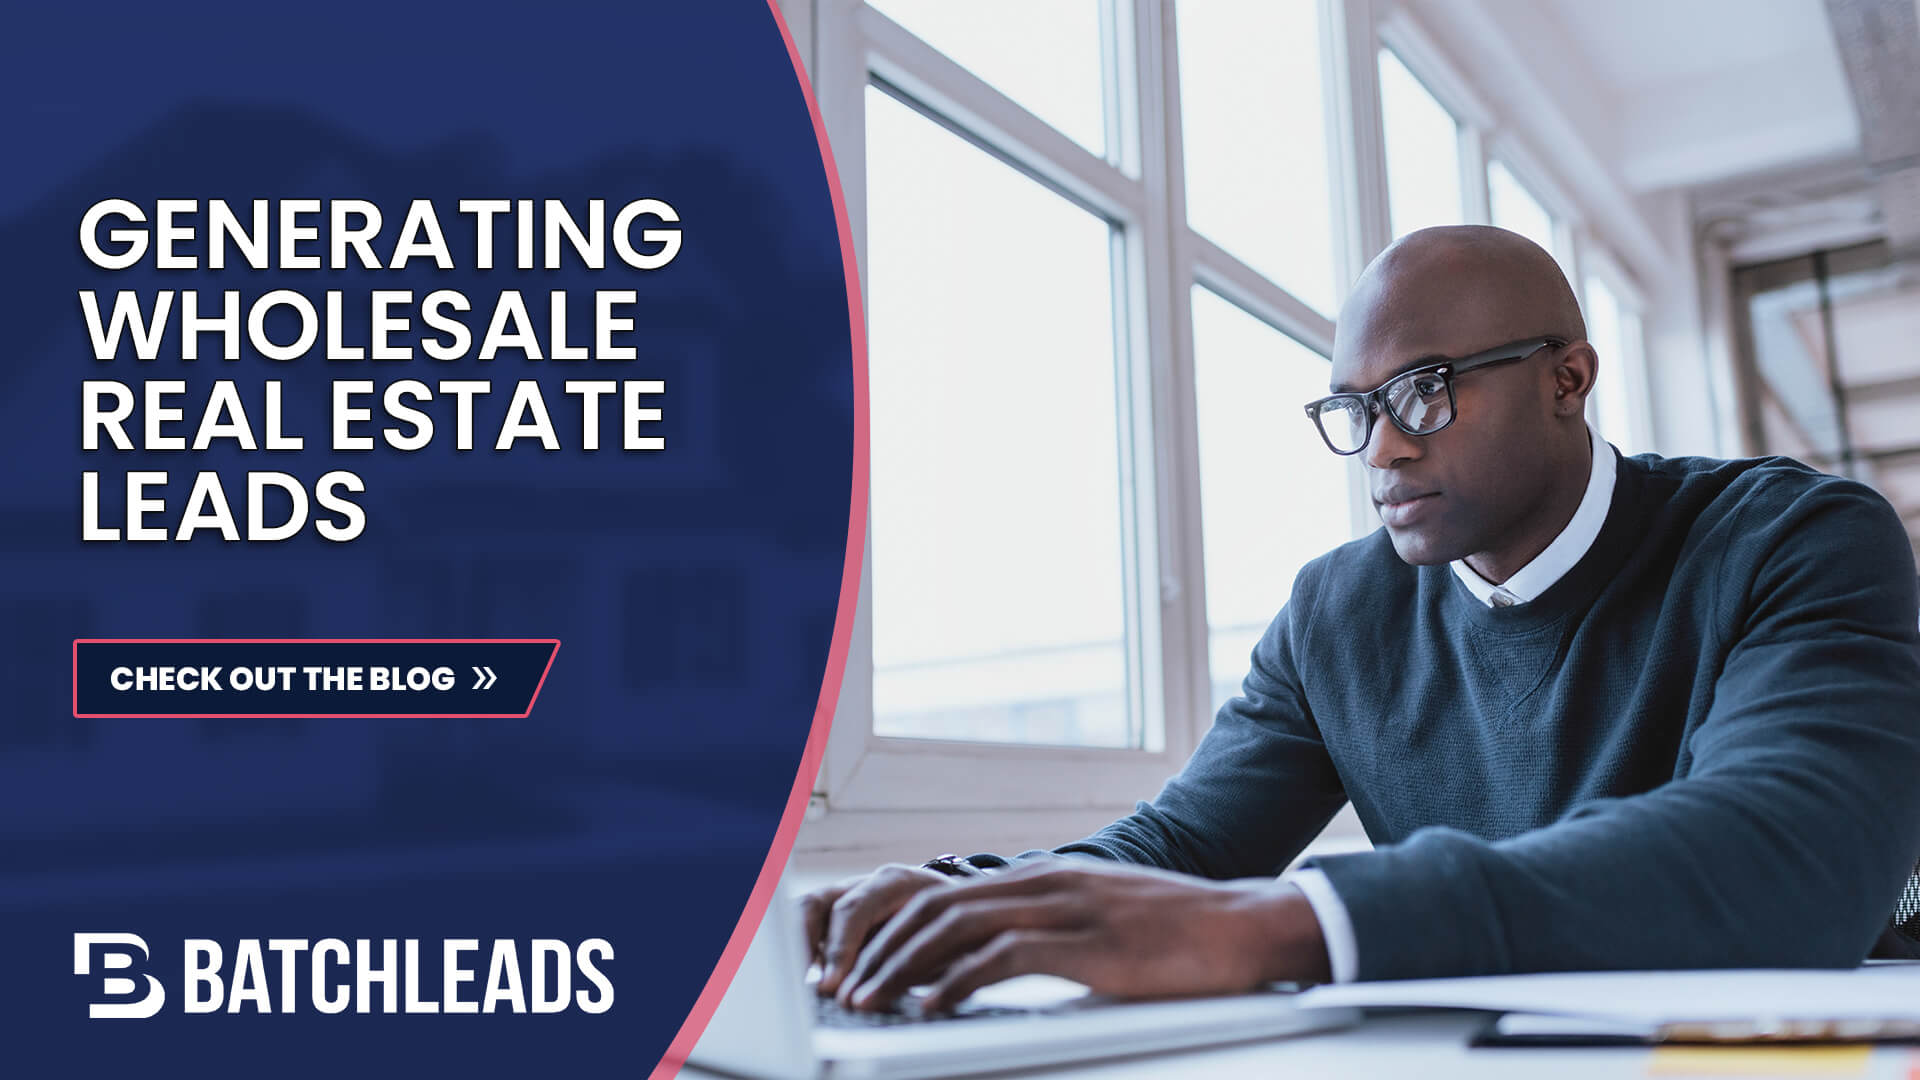 GENERATING WHOLESALE REAL ESTATE LEADS